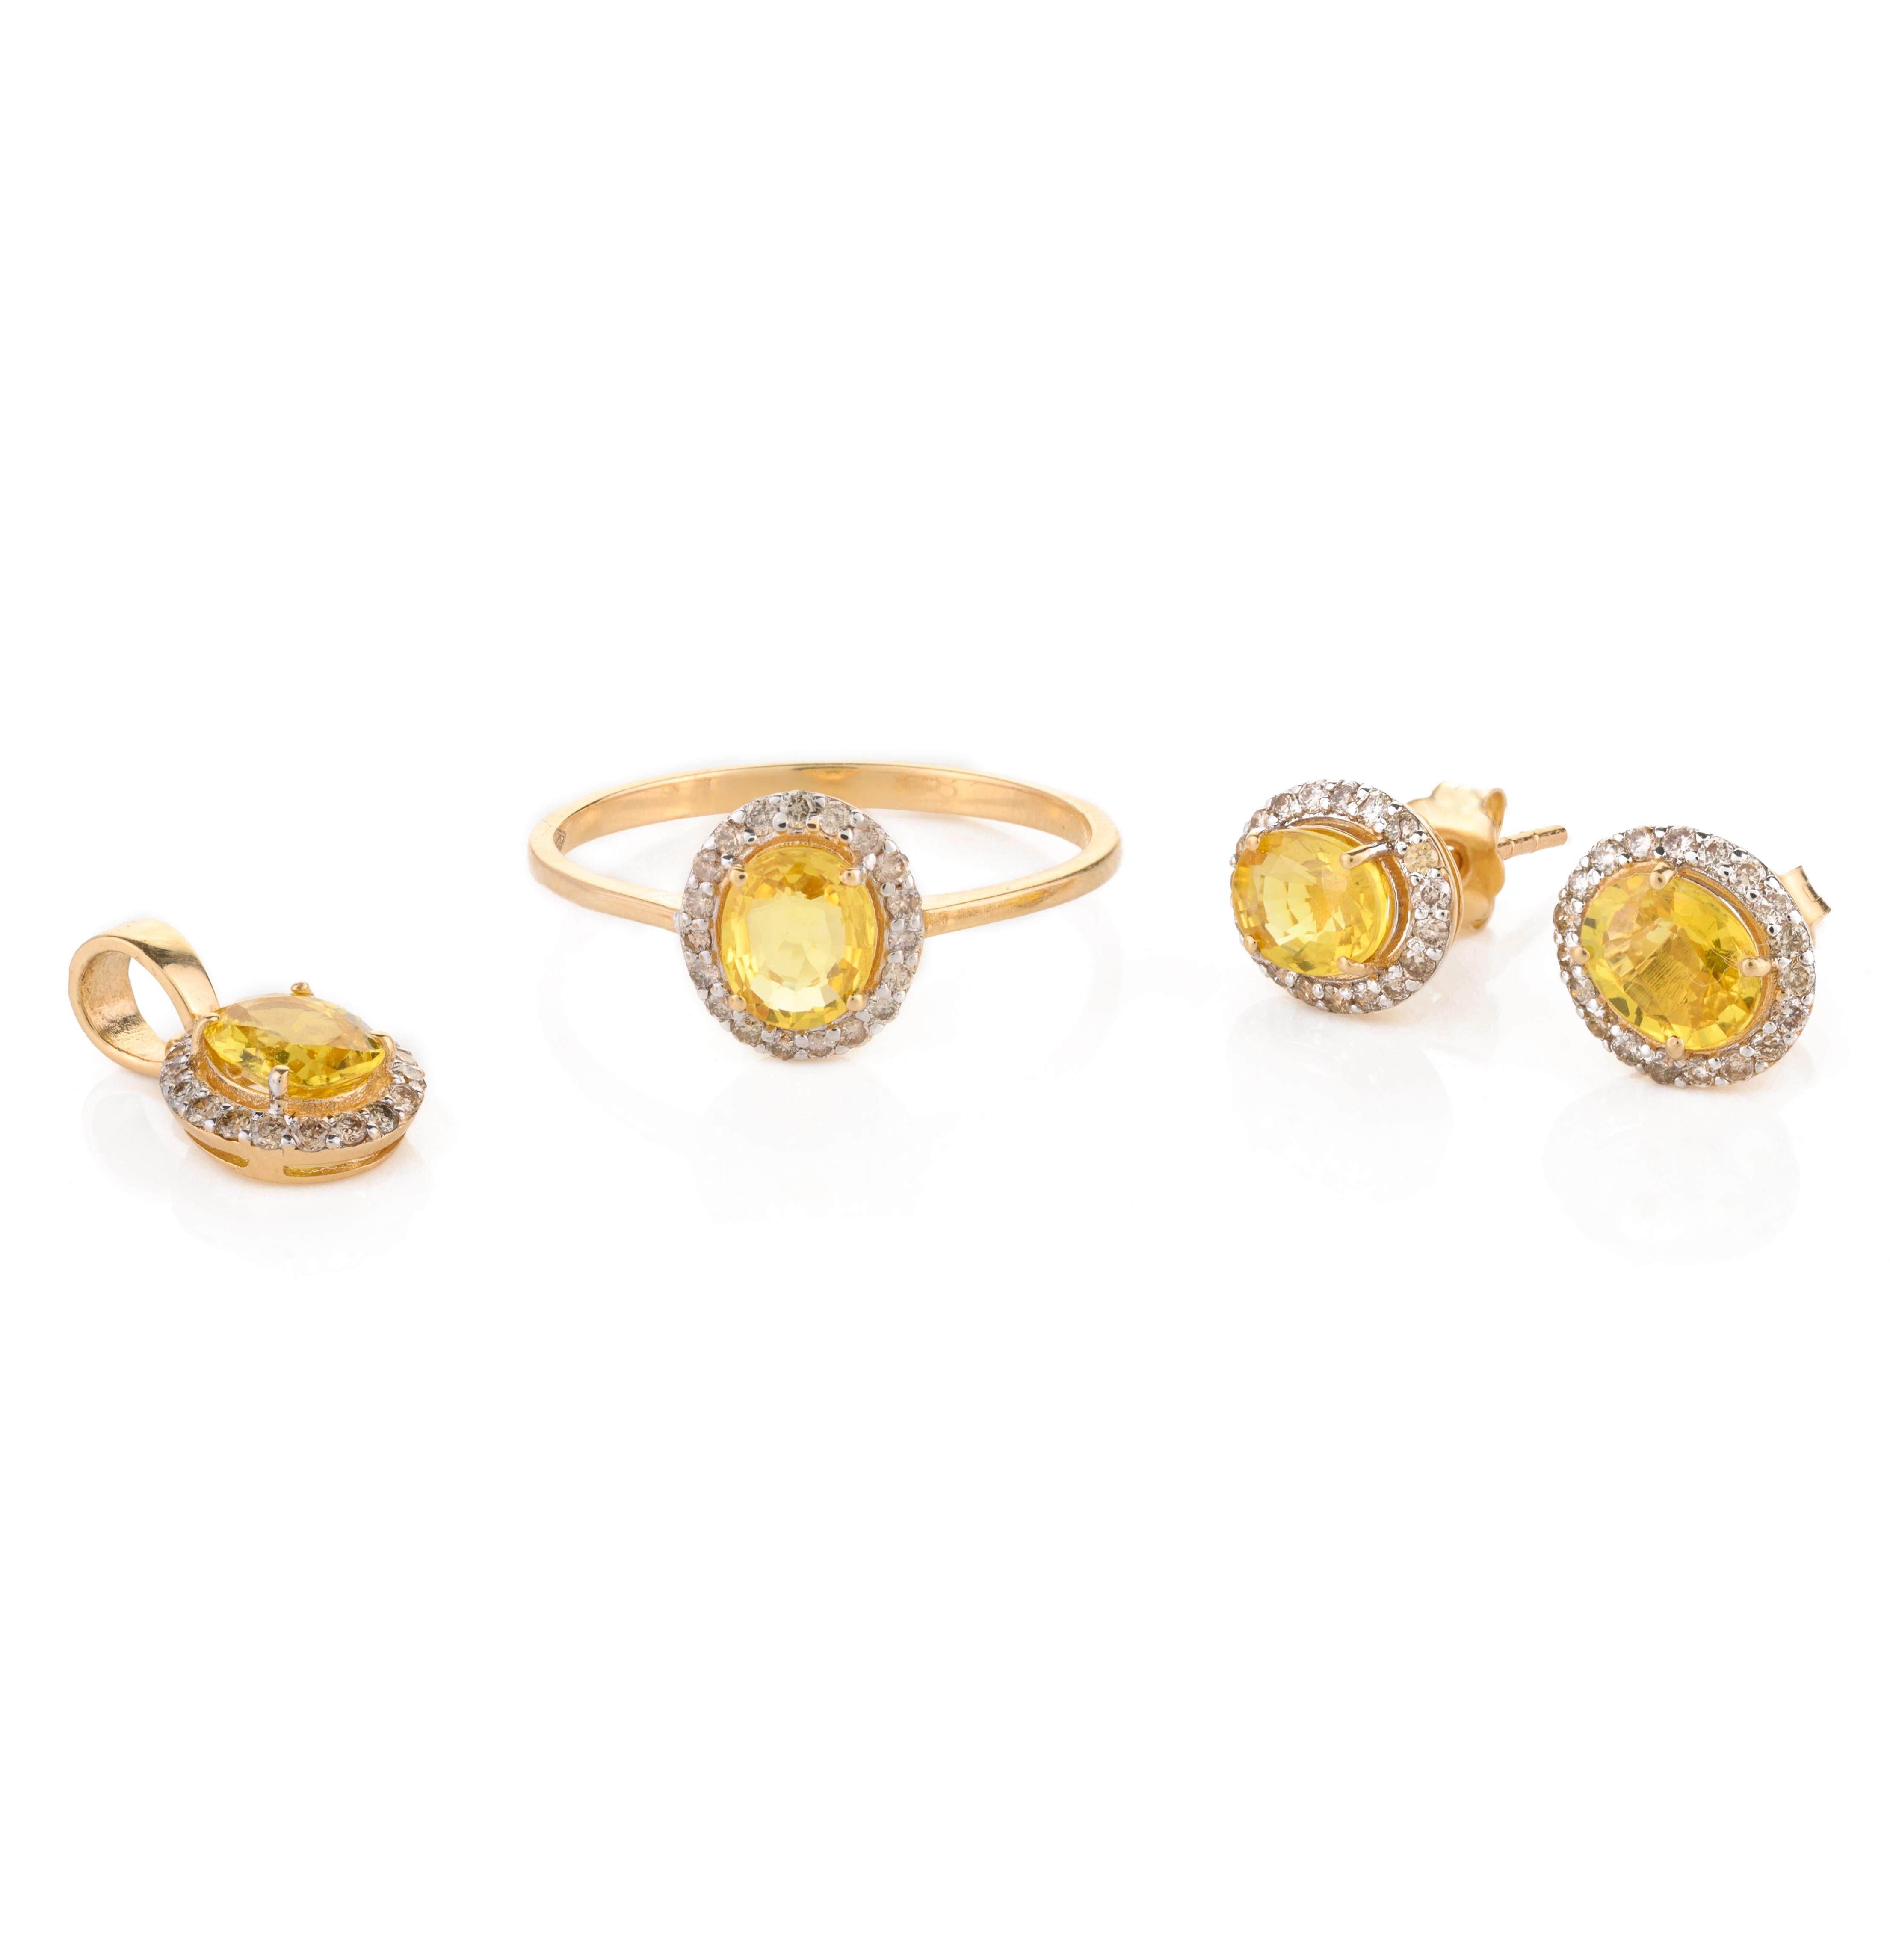 For Sale:  18k Gold Yellow Sapphire and Diamond Halo Ring, Earrings and Pendant Jewelry Set 19